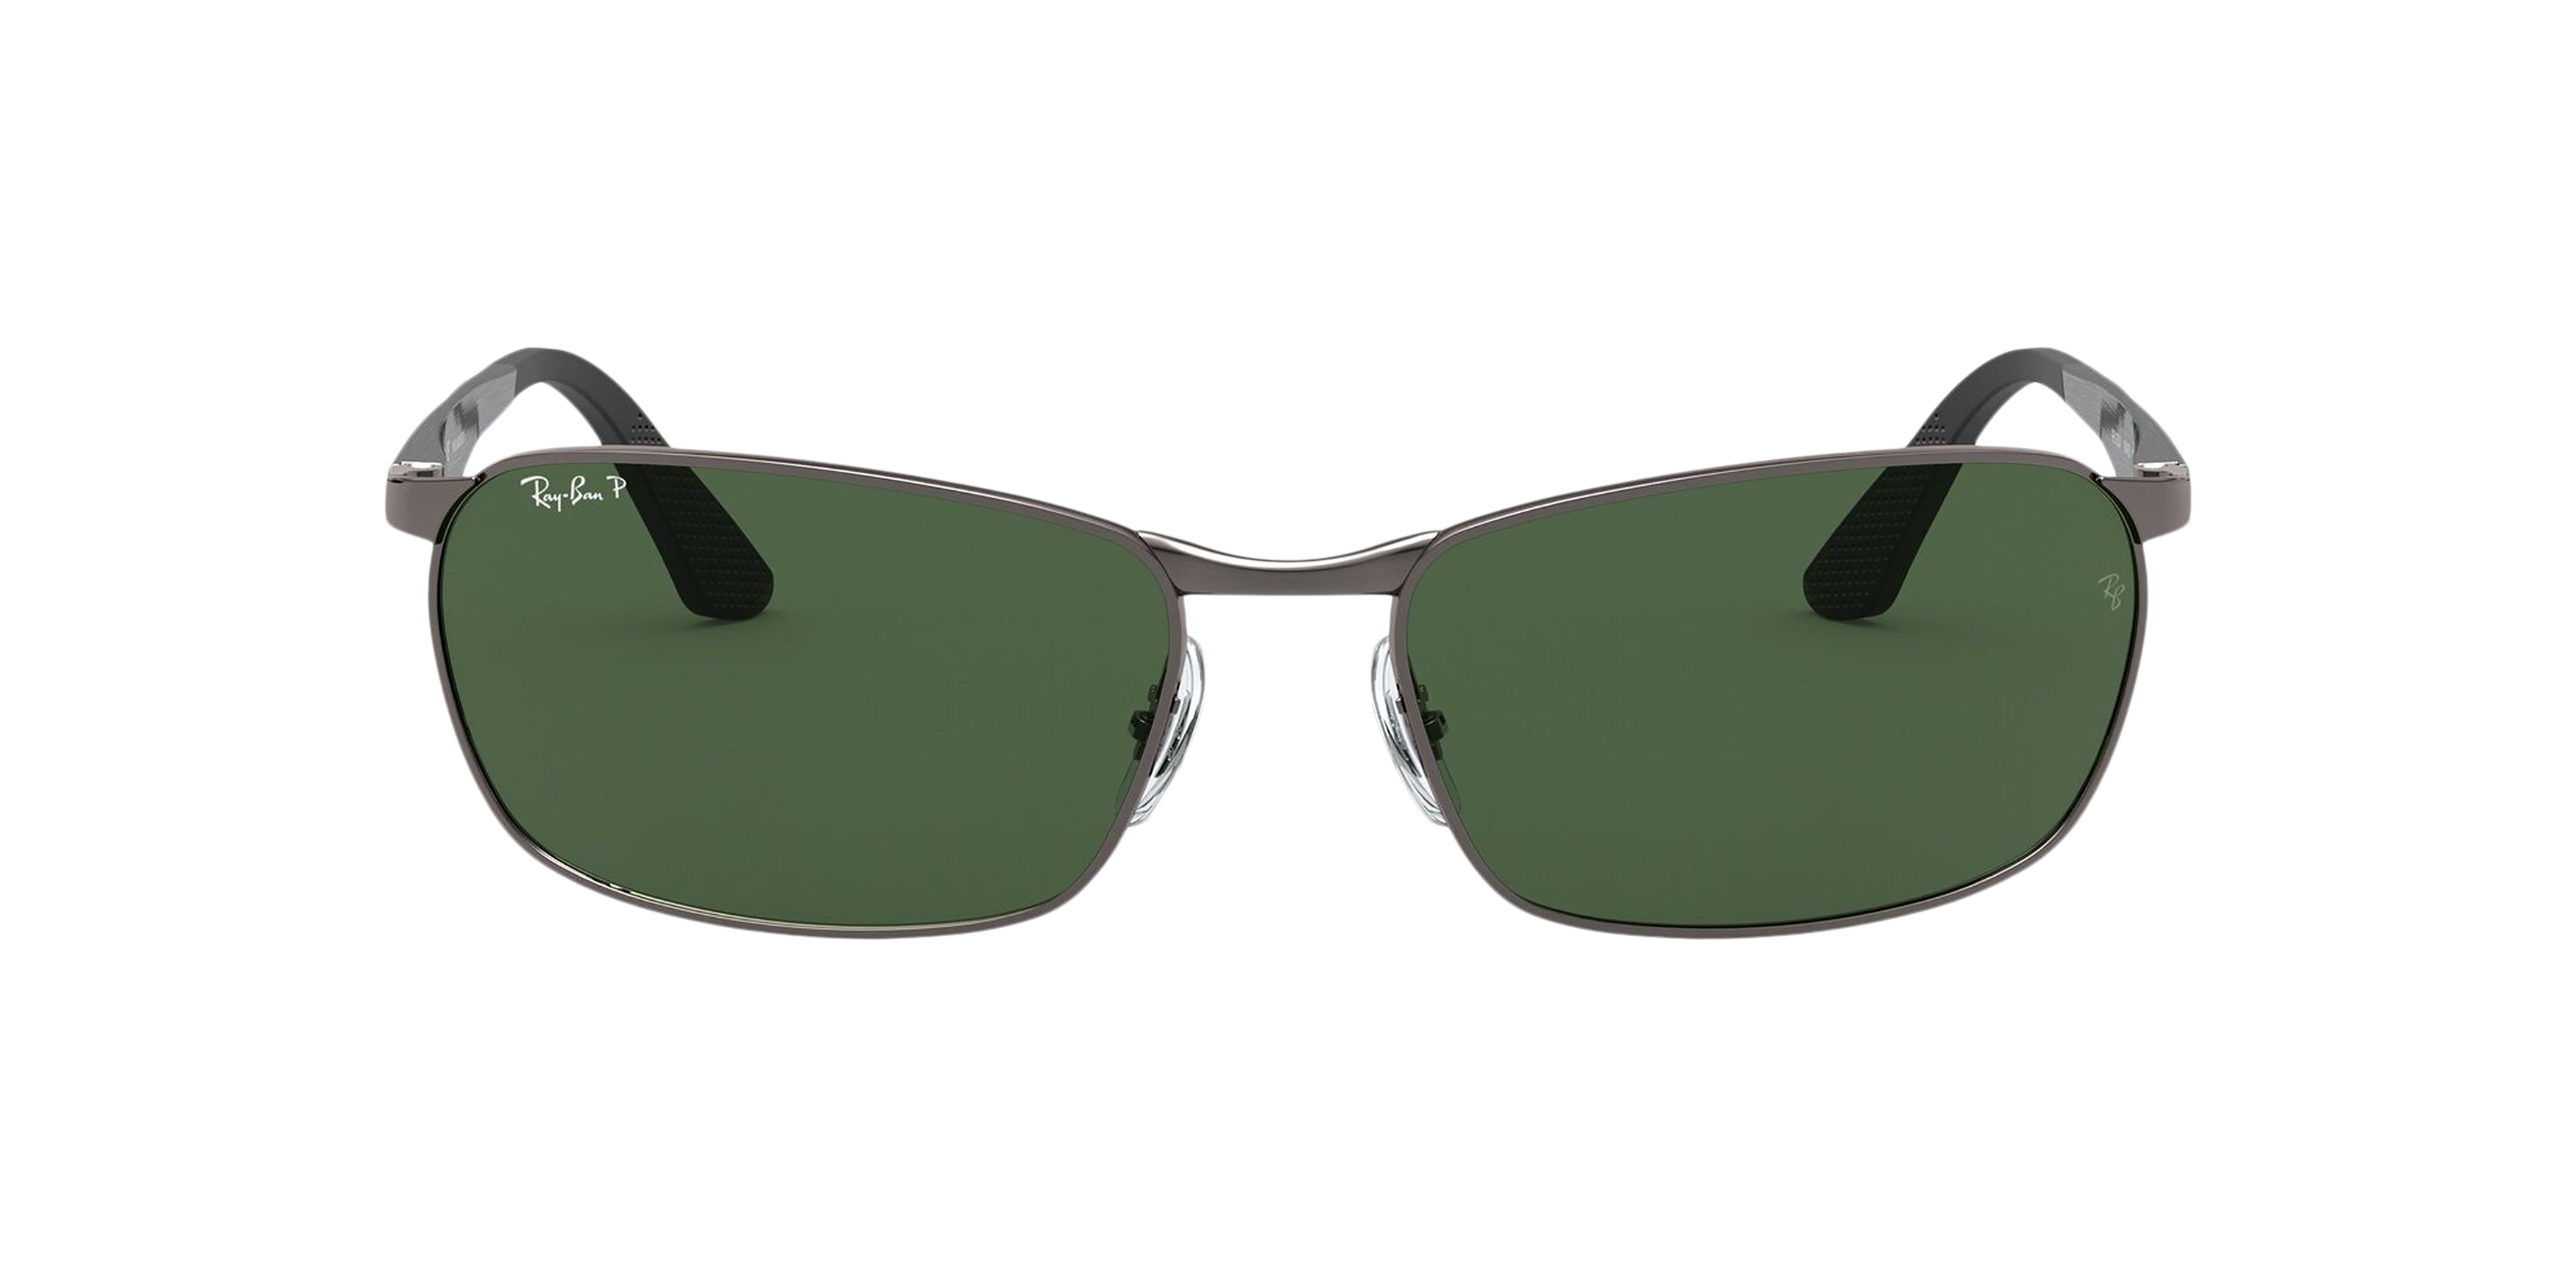 [products.image.front] Ray-Ban RB3534 004/58